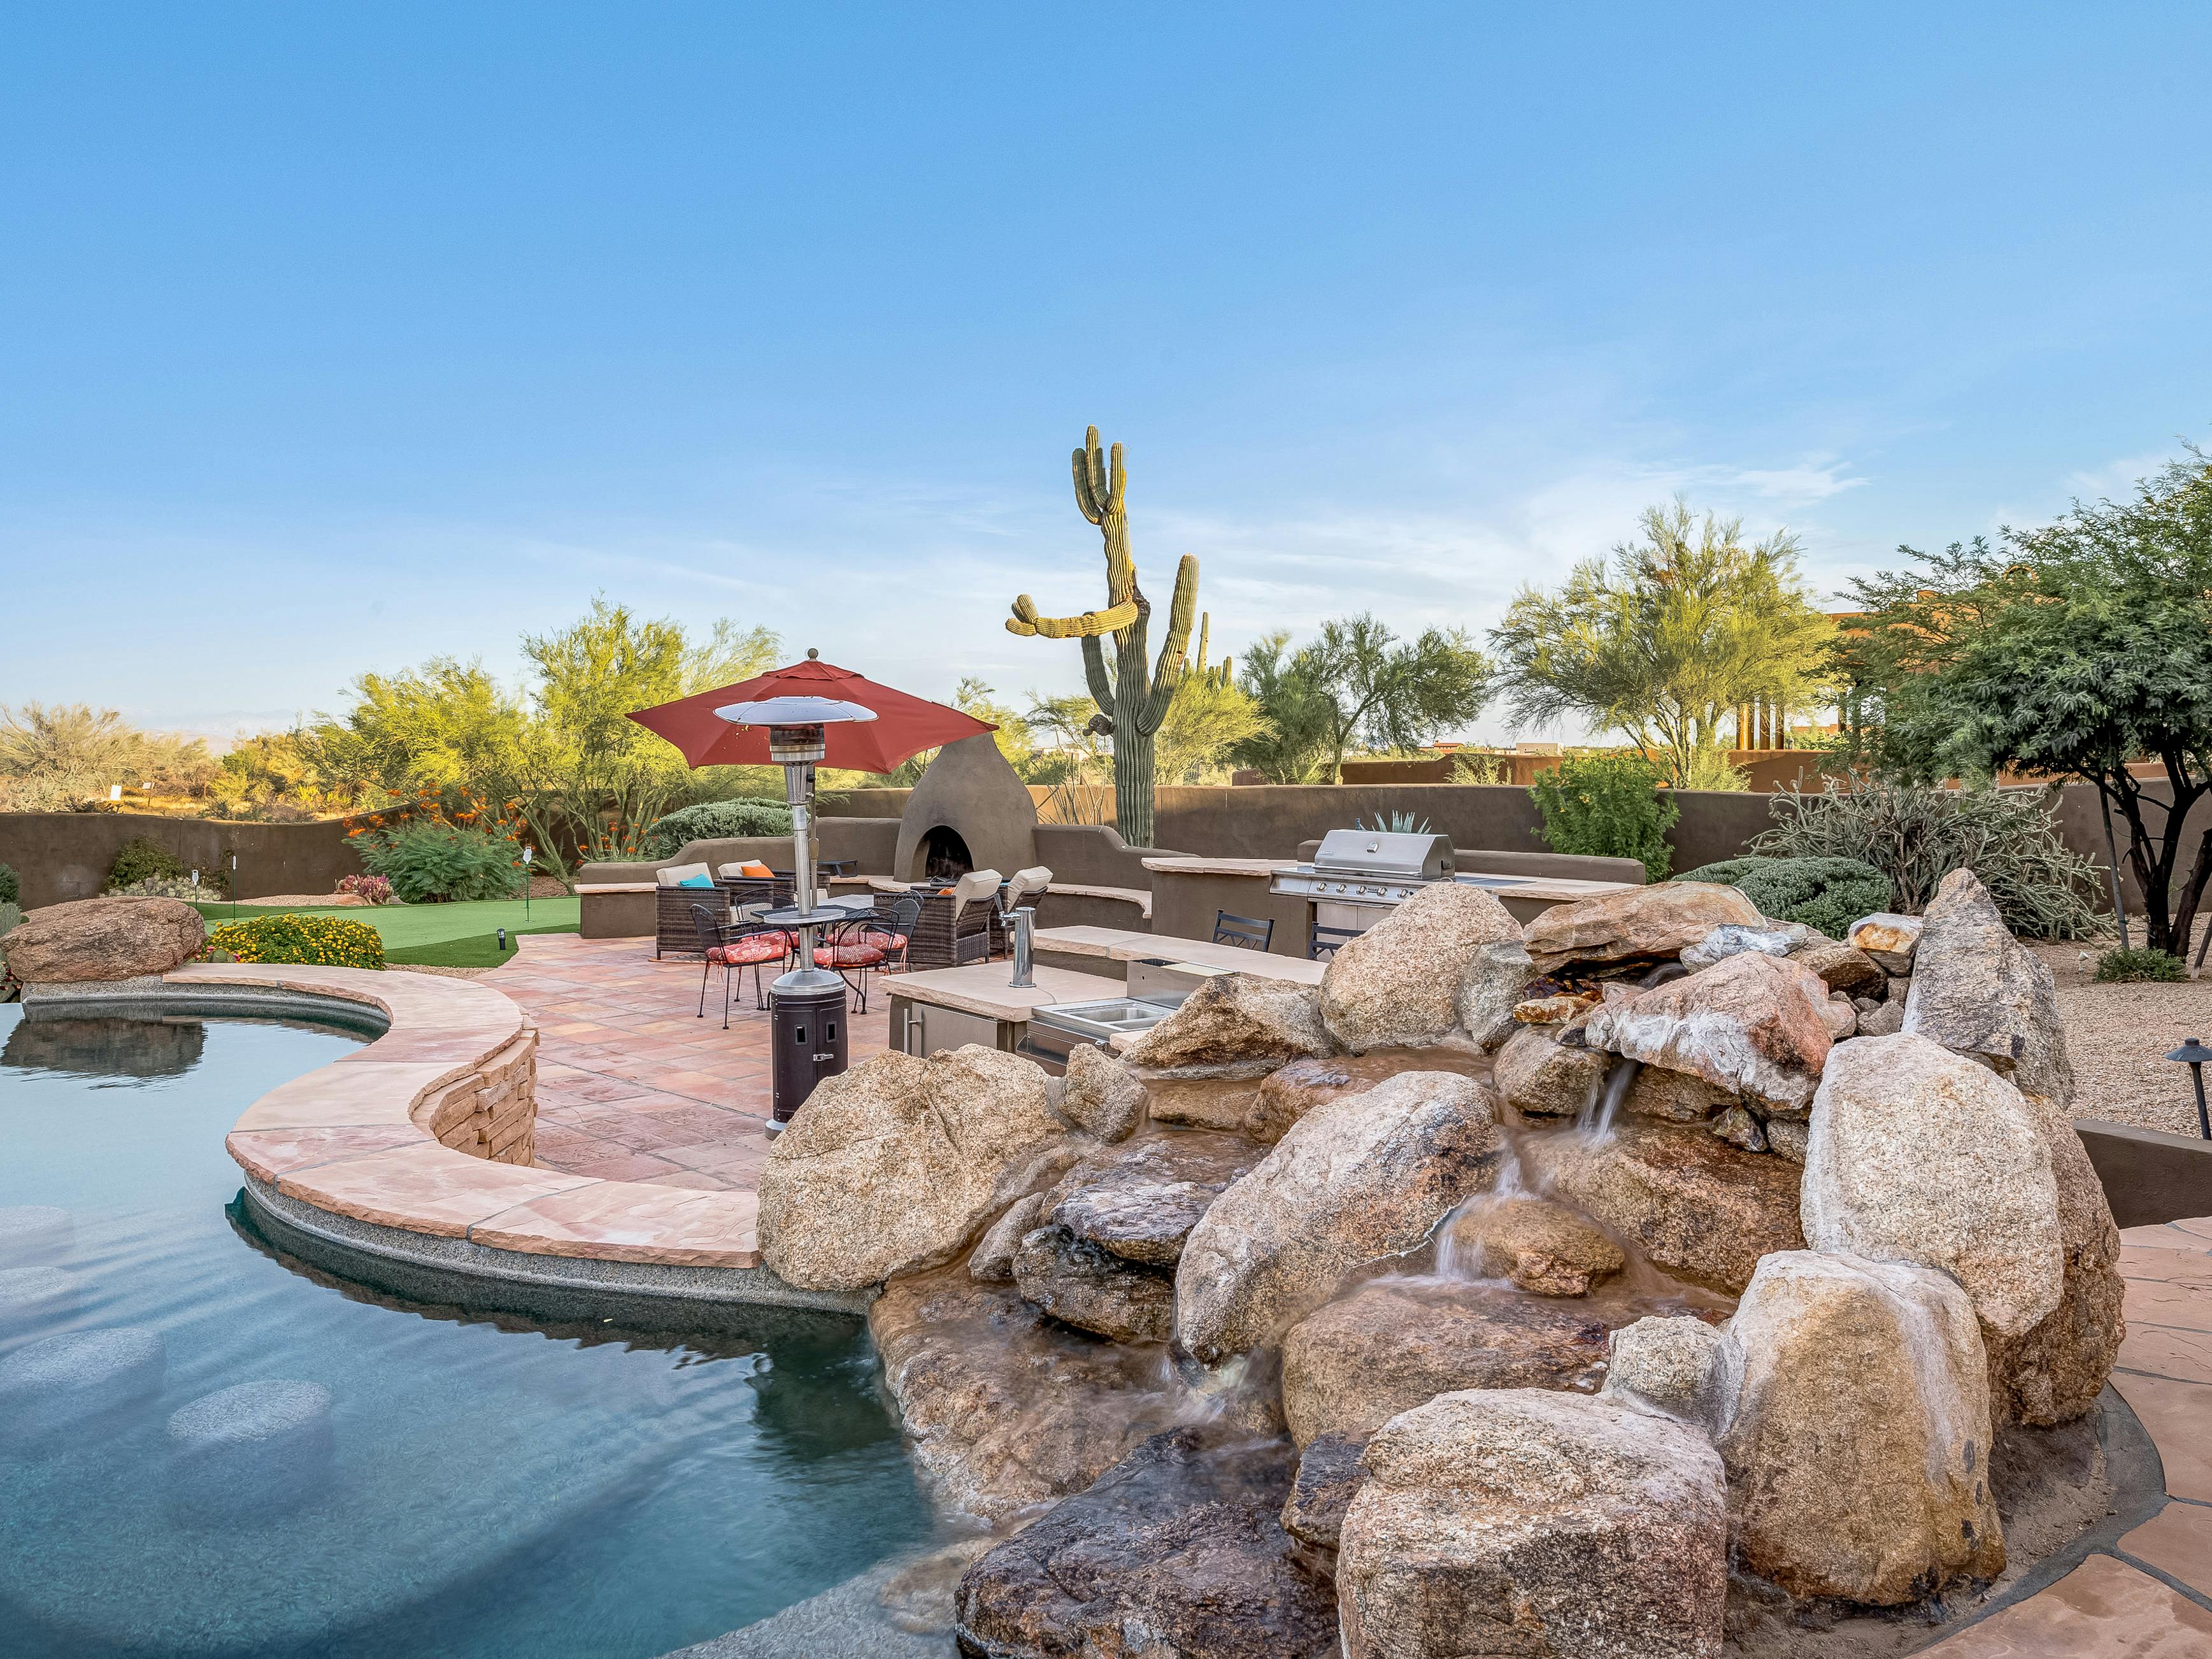 backyard of scottsdale, az vacation home with infinity pool and desert landscaping